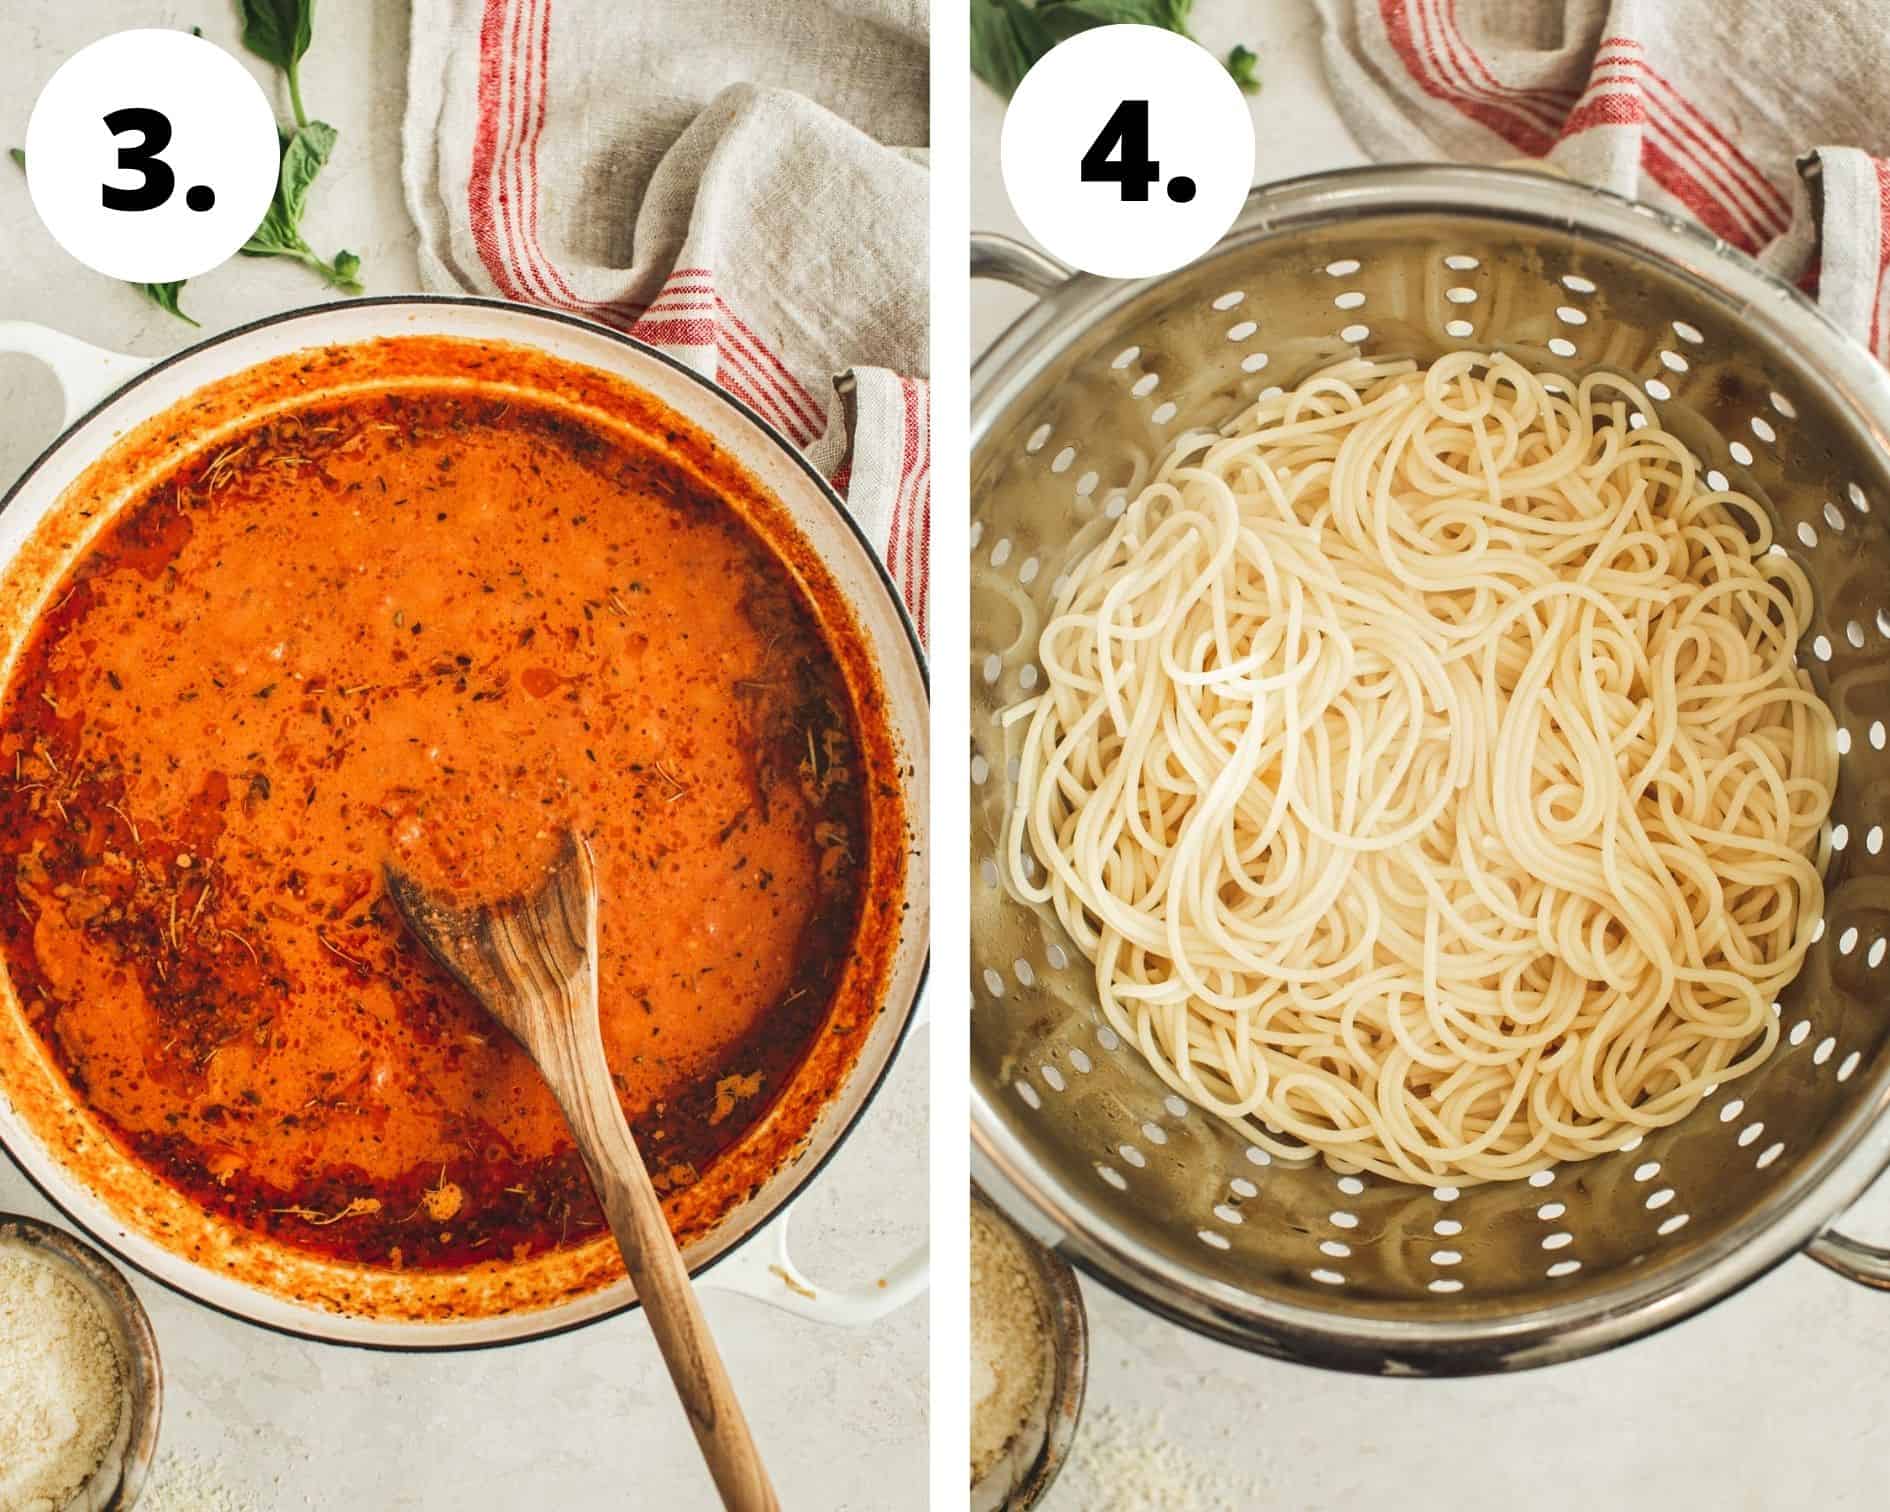 Baked spaghetti bolognese process steps 3 and 4.